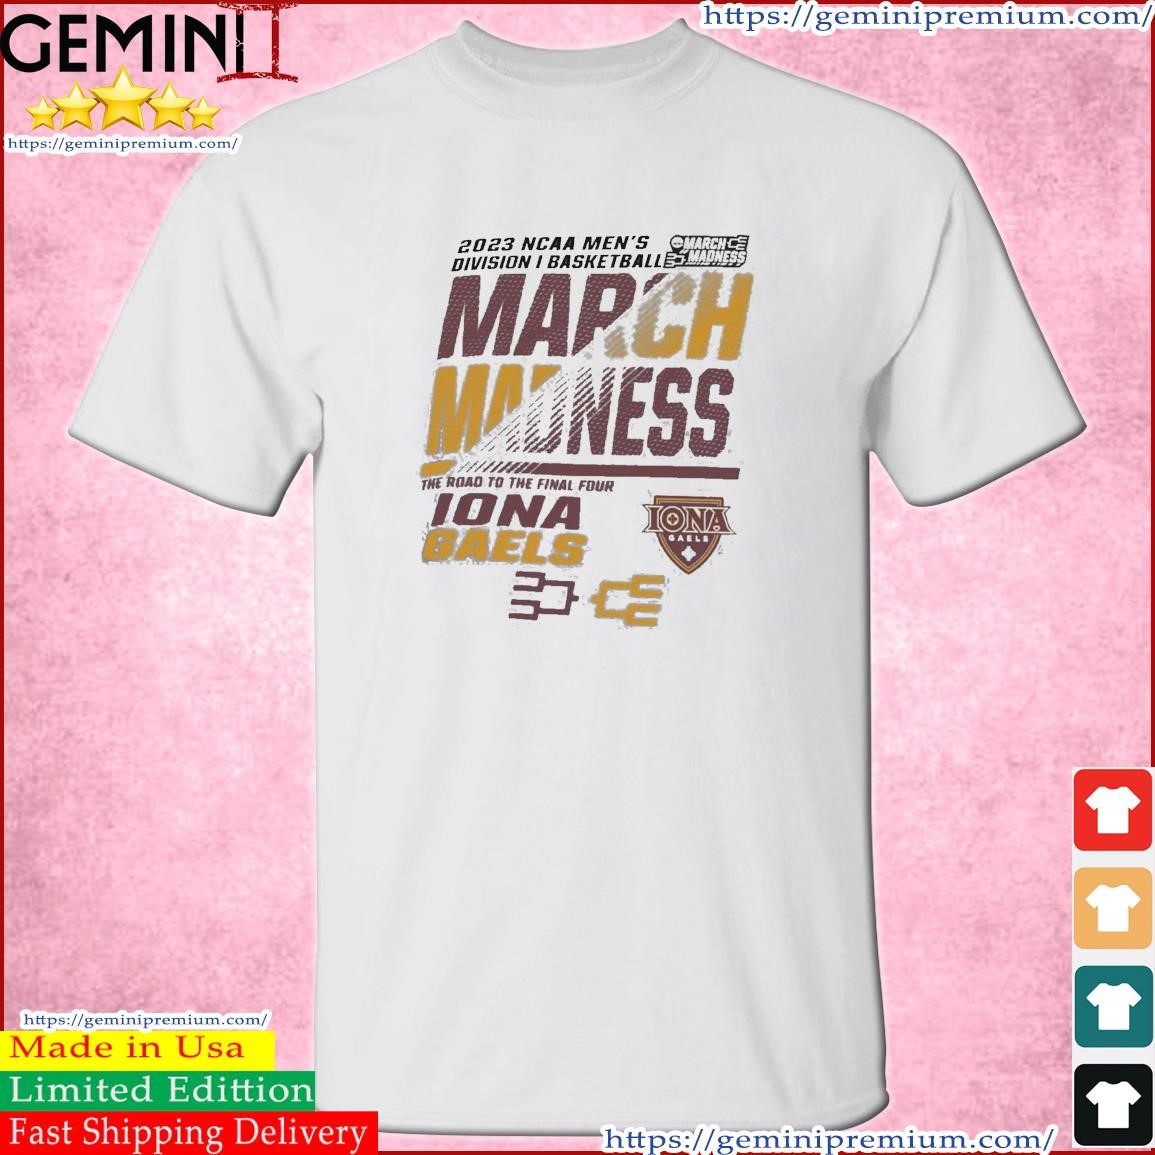 Iona Men's Basketball 2023 NCAA March Madness The Road To Final Four Shirt